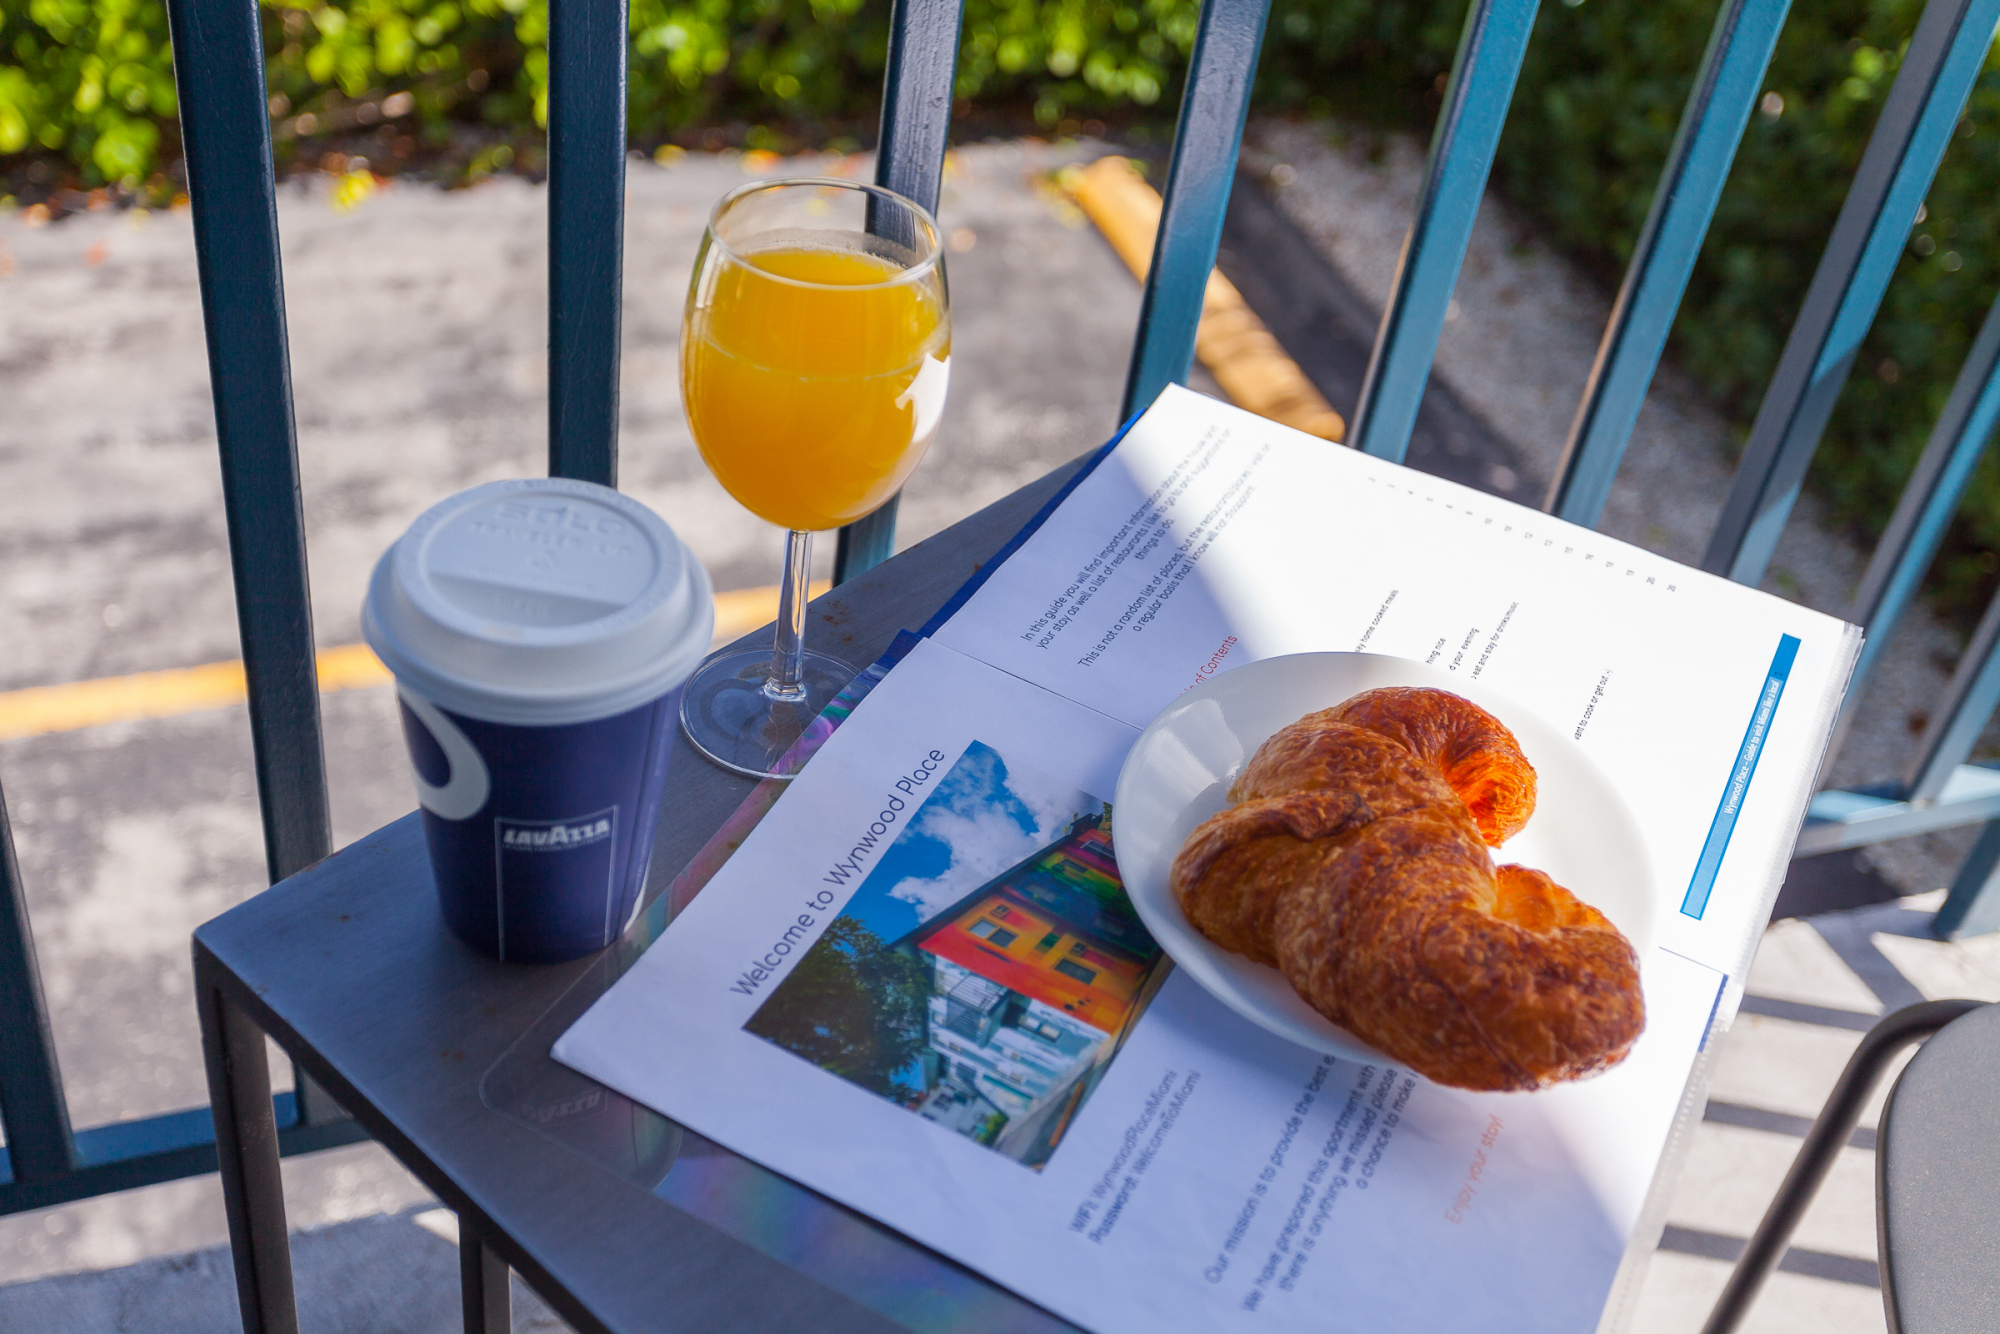 Grab a coffee and a croissant from the french bakery down the street and enjoy in your balcony while you decide what to do or where to go for lunch with our own guide of favorite places in Wynwood and Miami